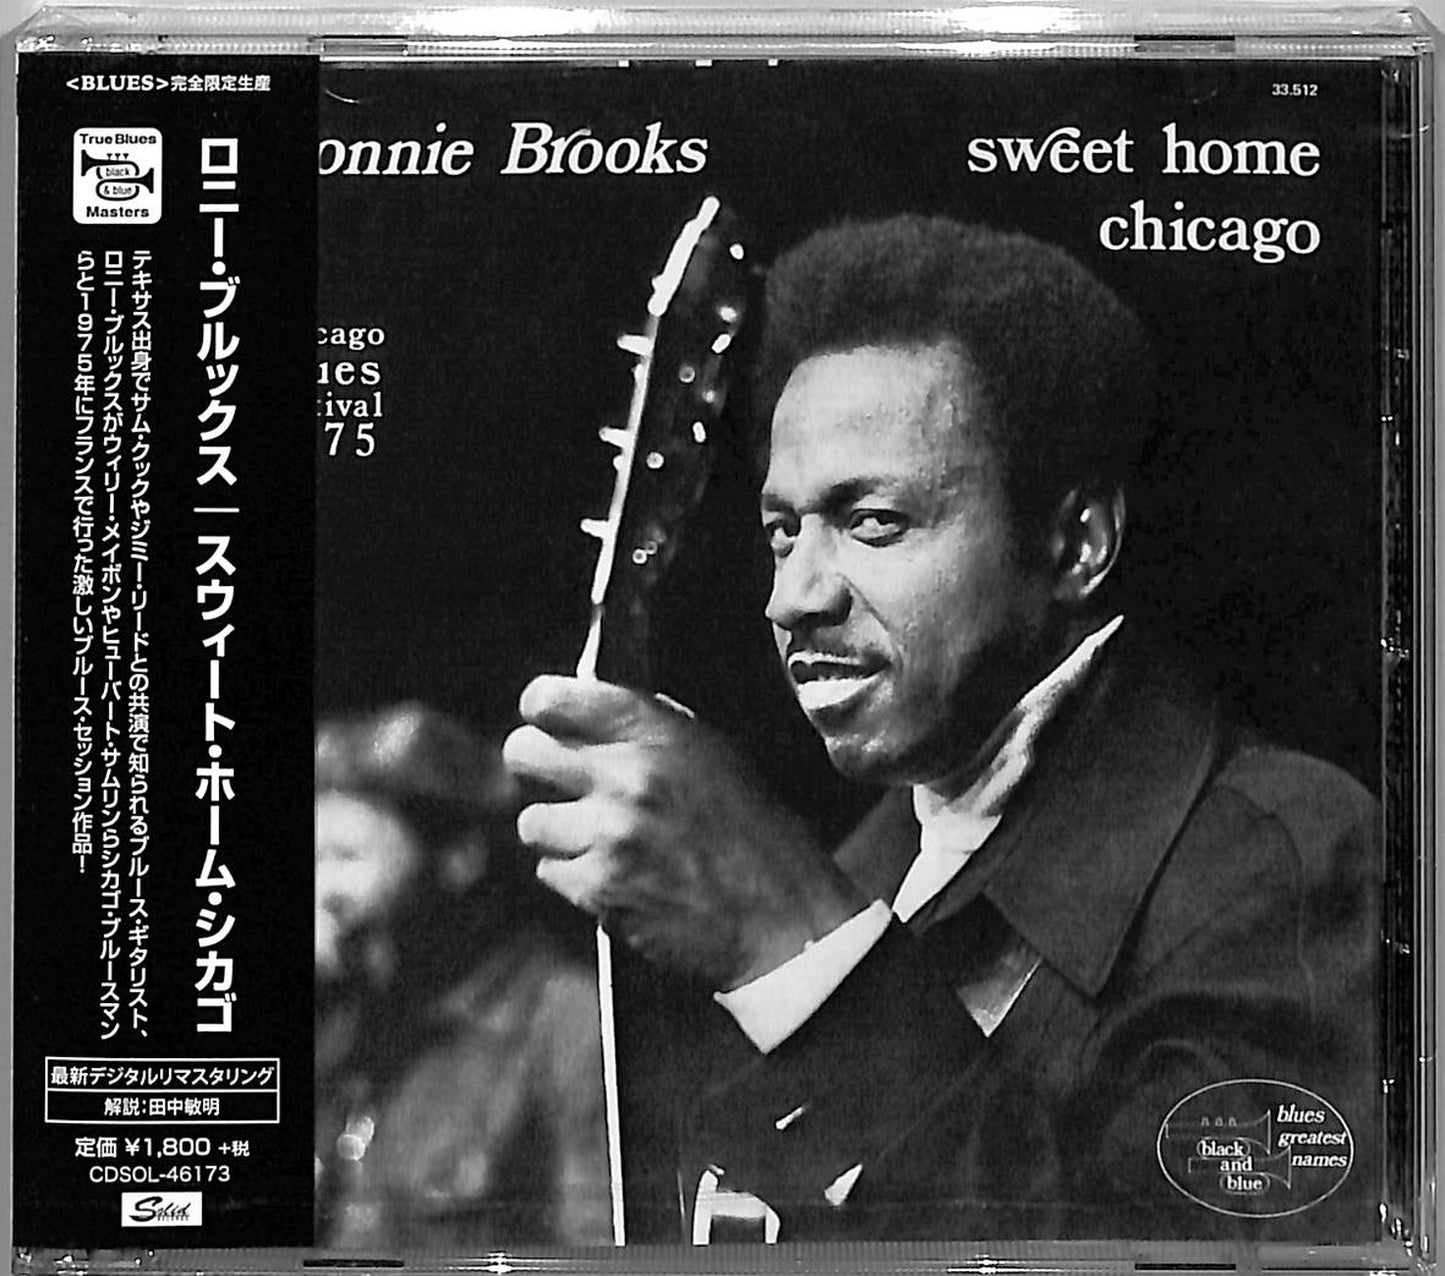 Lonnie Brooks - Sweet Home Chicago - Japan  CD Limited Edition